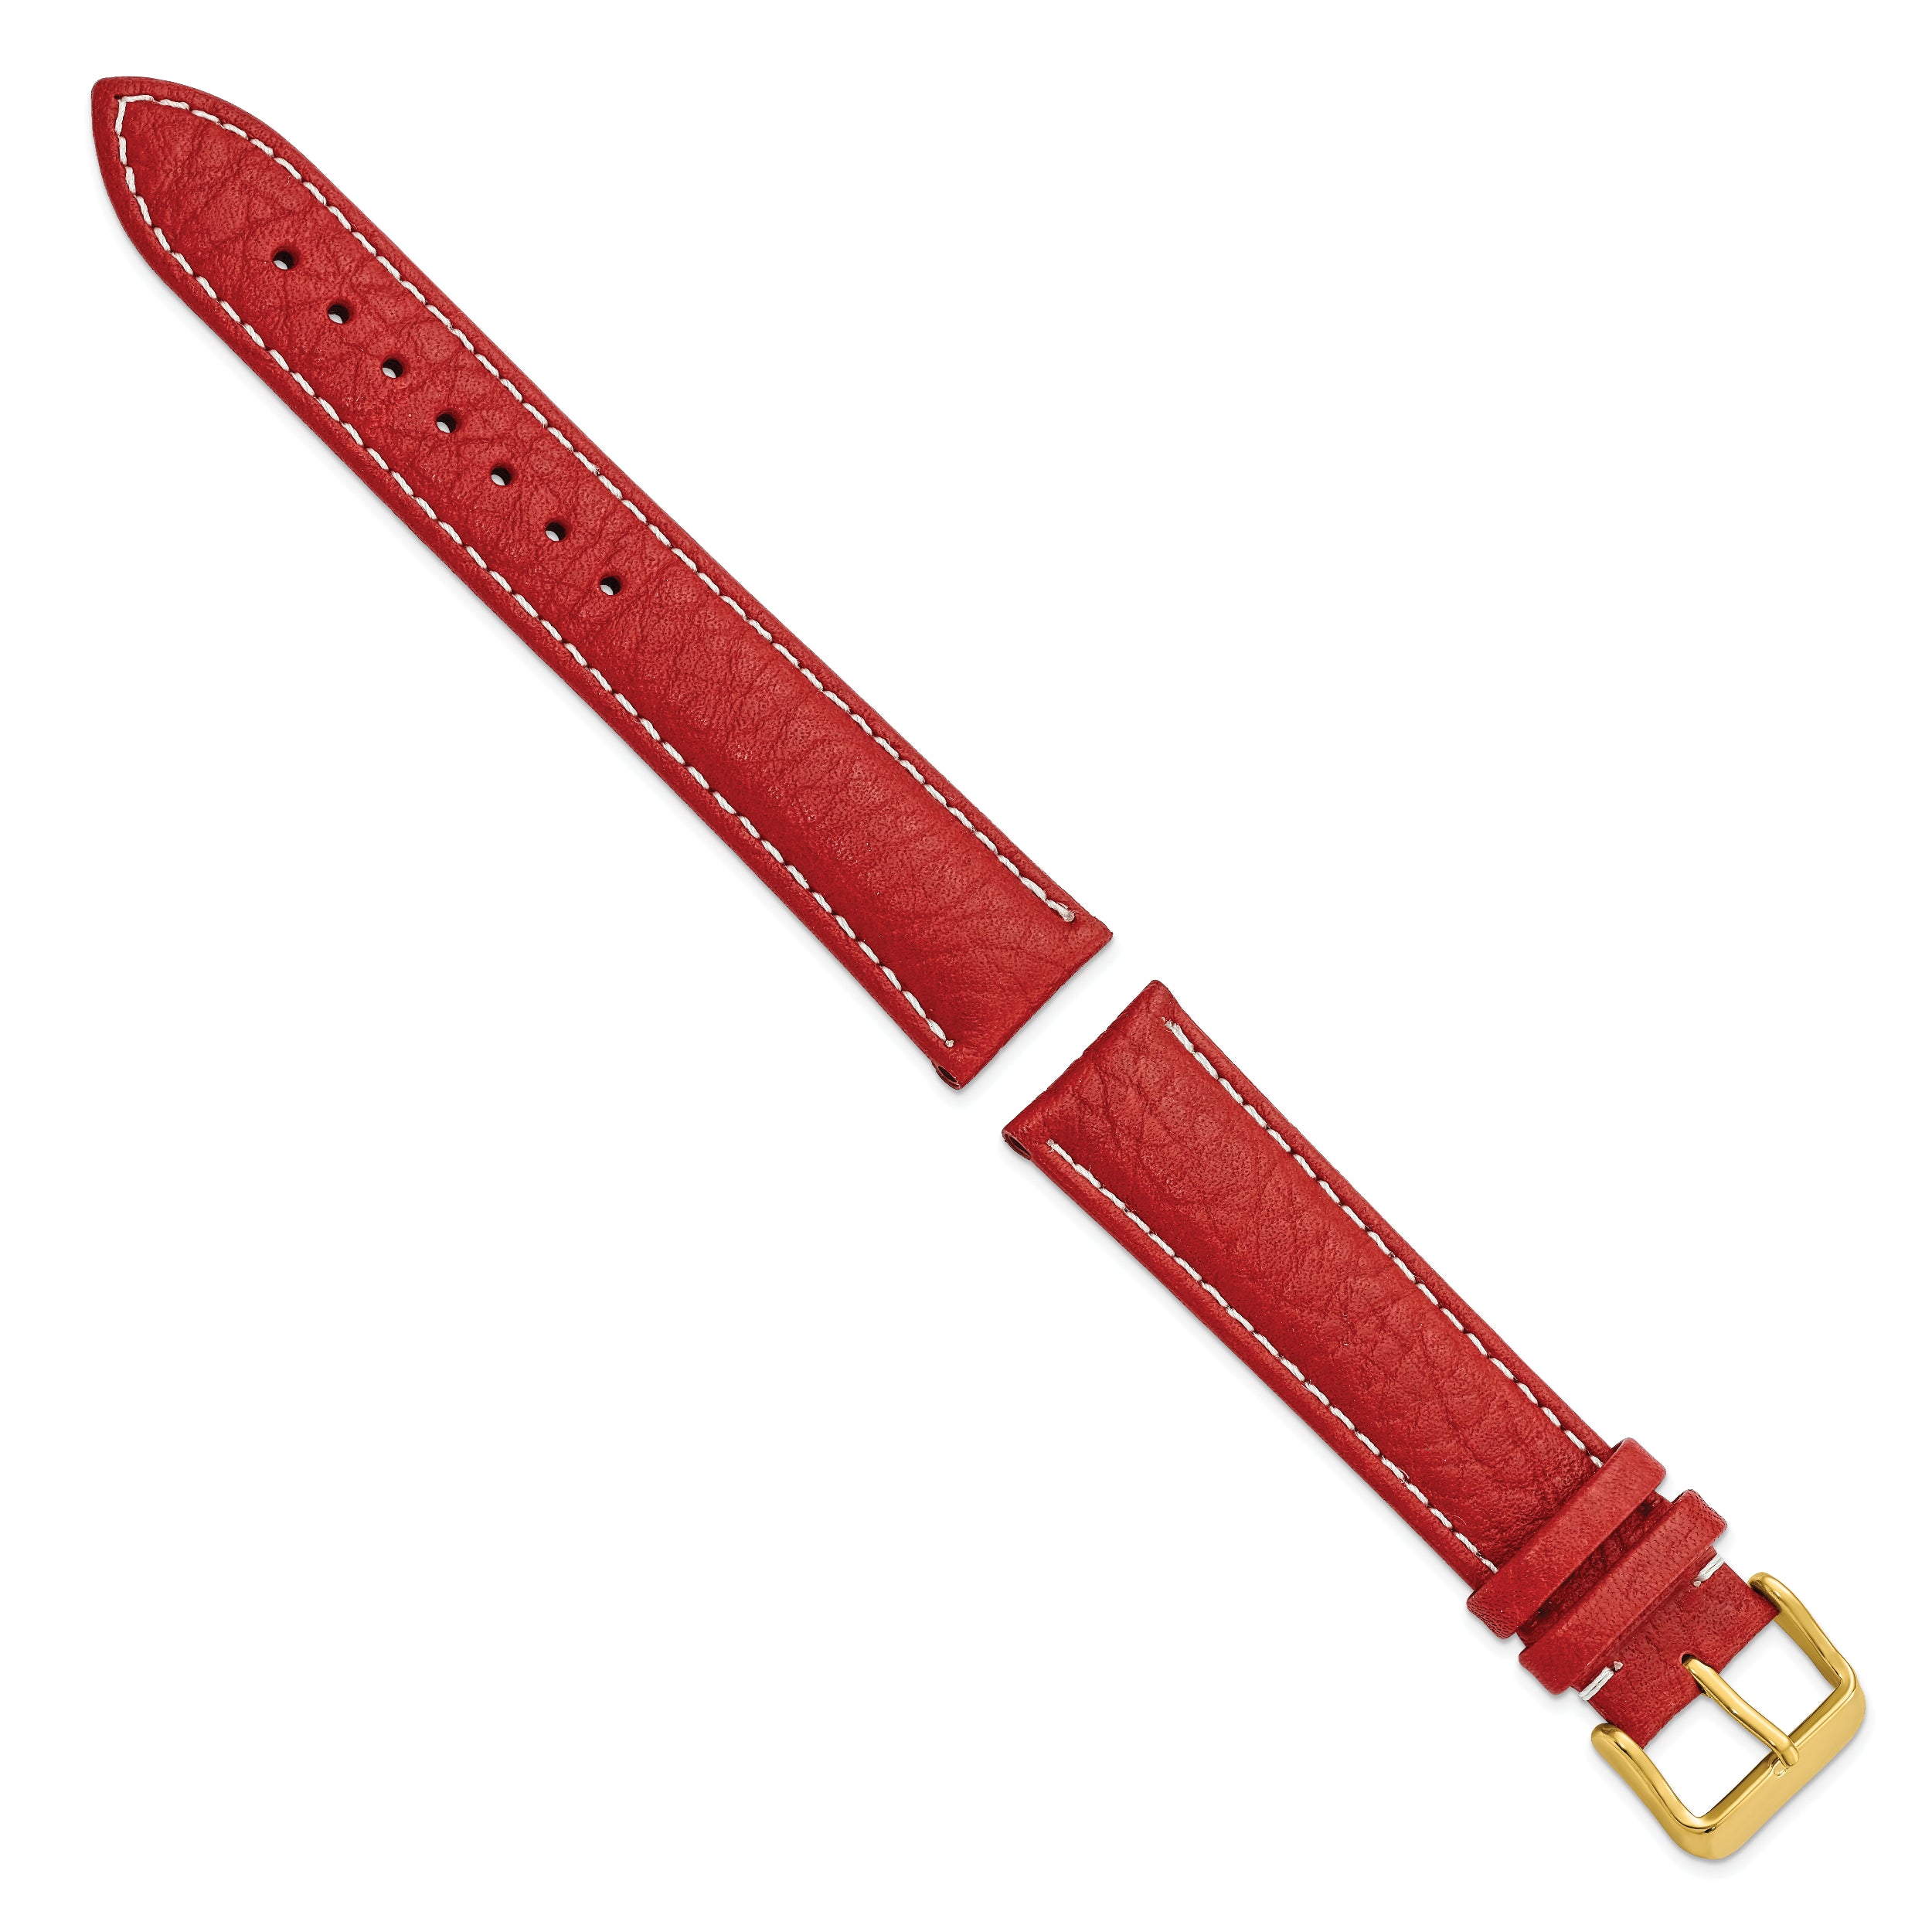 16mm Red Sport Leather with White Stitching and Gold-tone Buckle 7.5 inch Watch Band